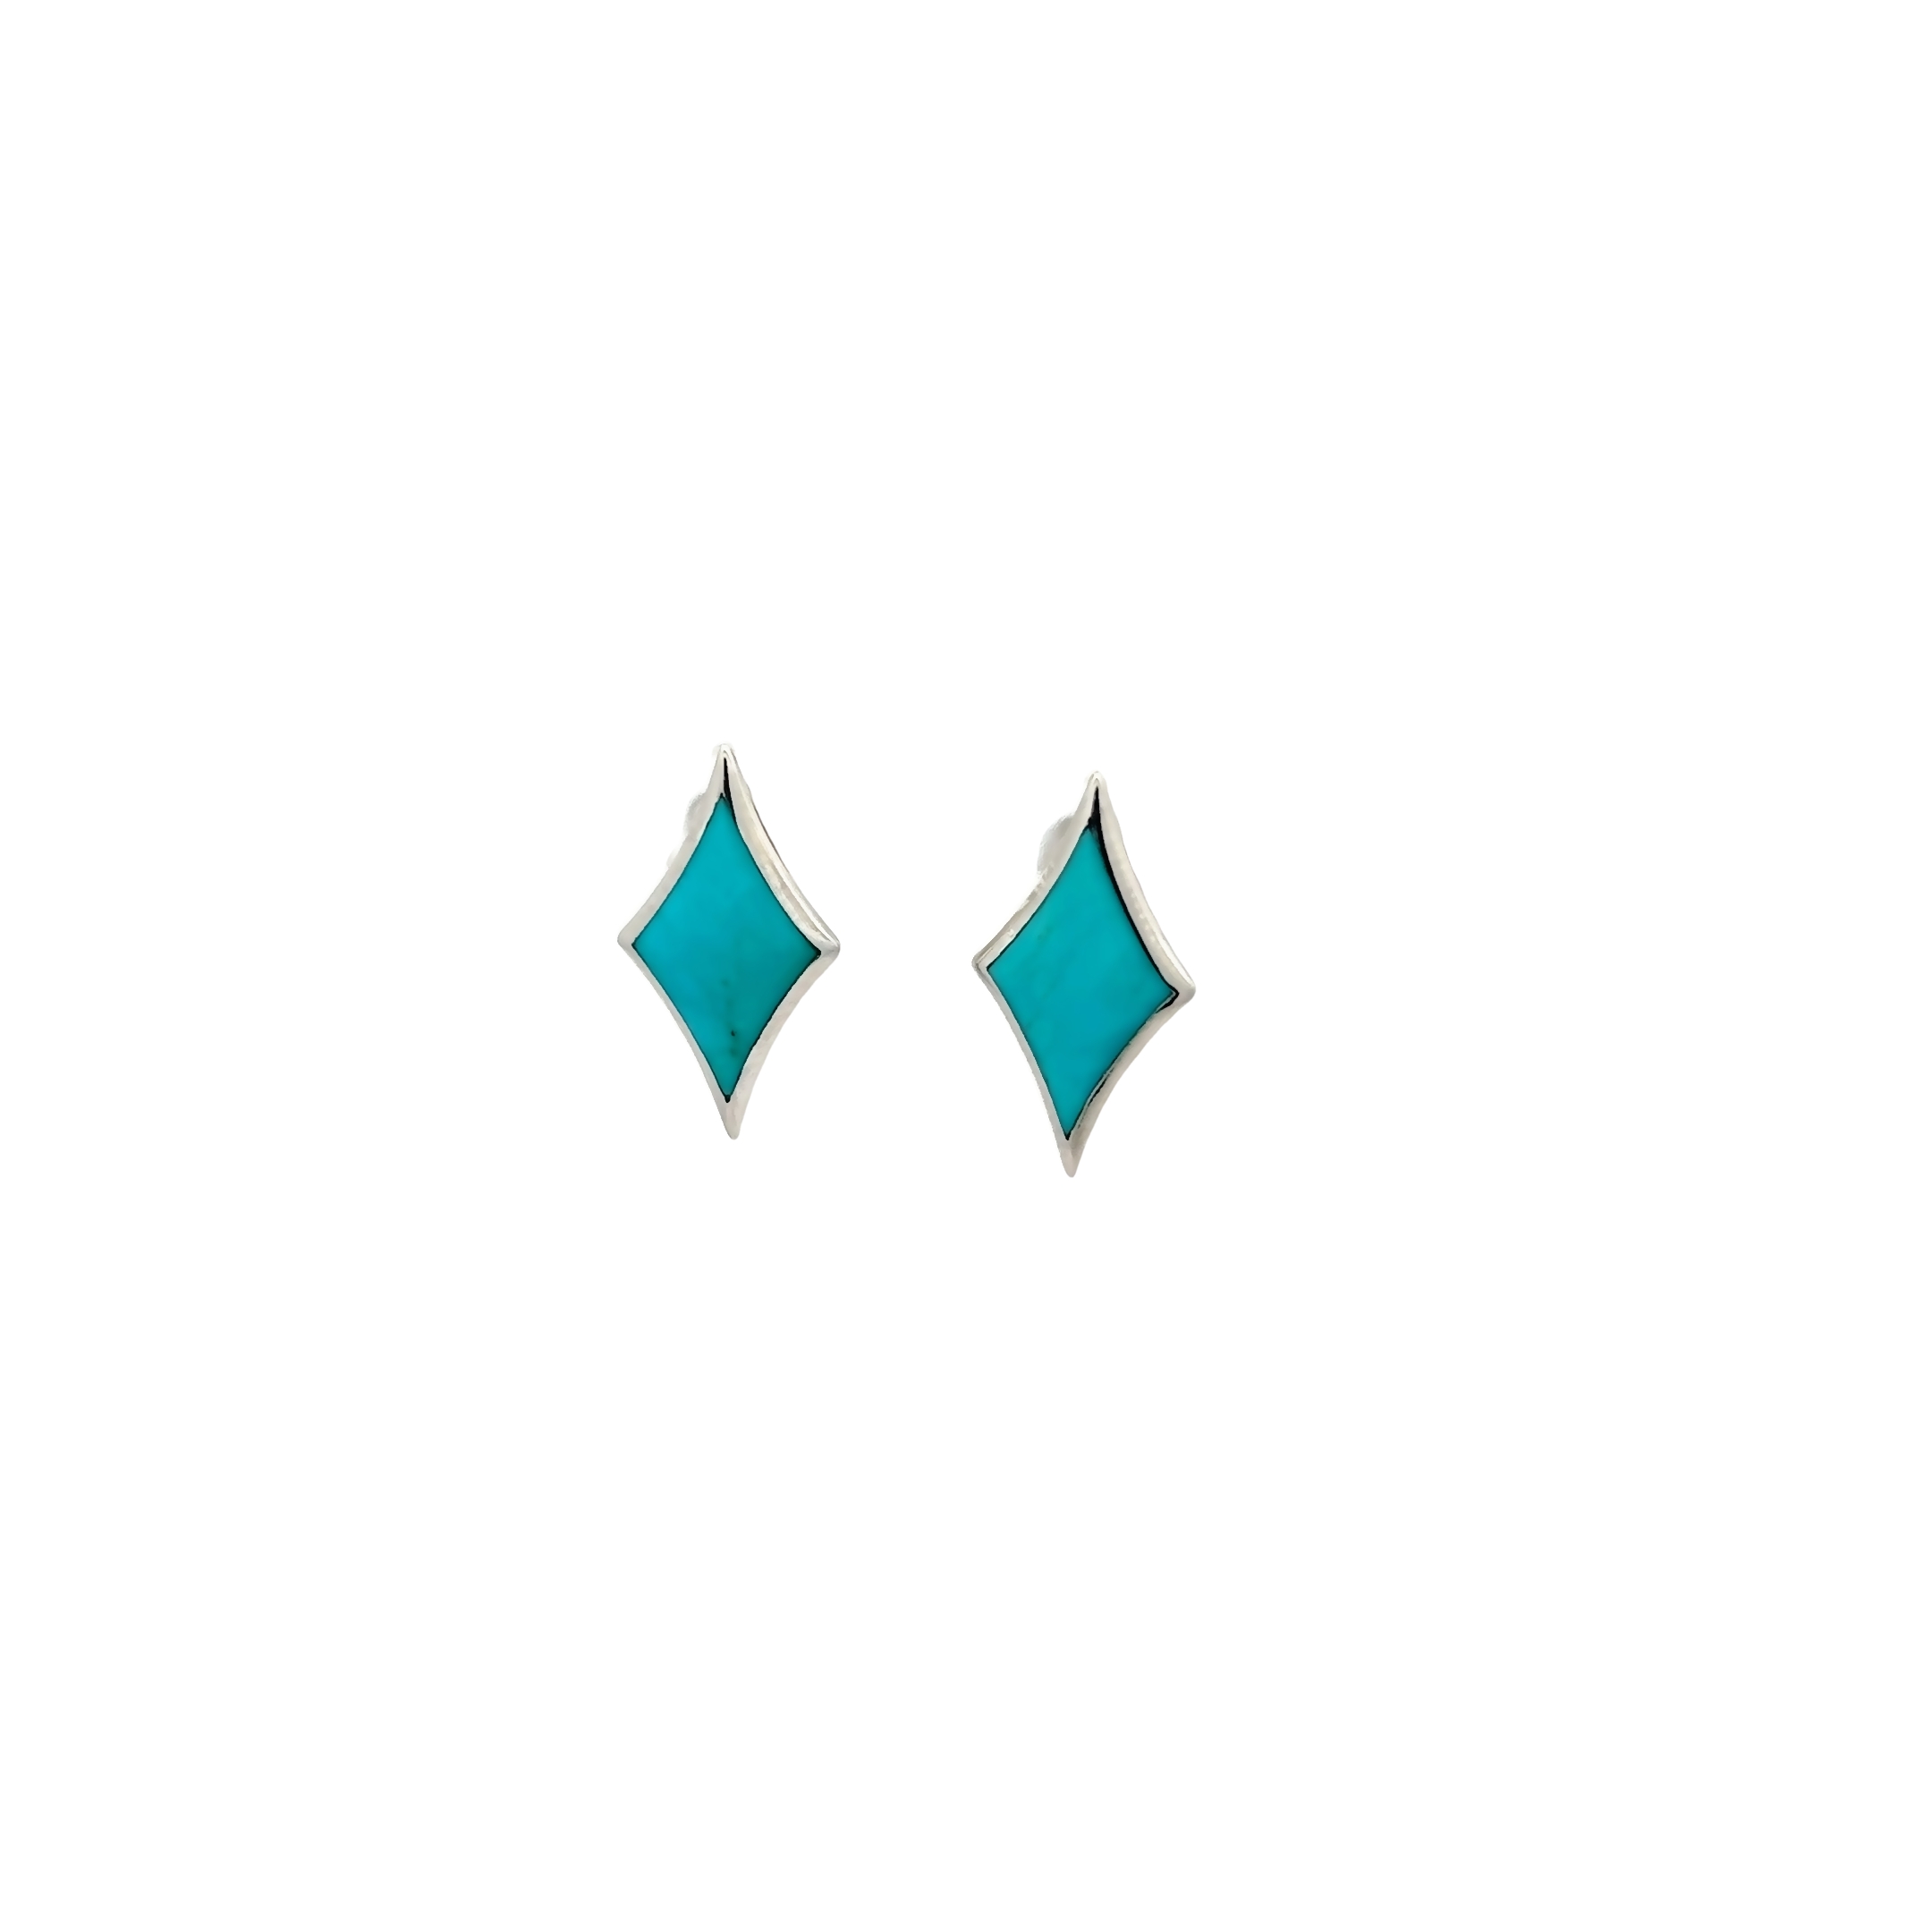 Sterling silver stud earings with Arizona Turquoise inlay.